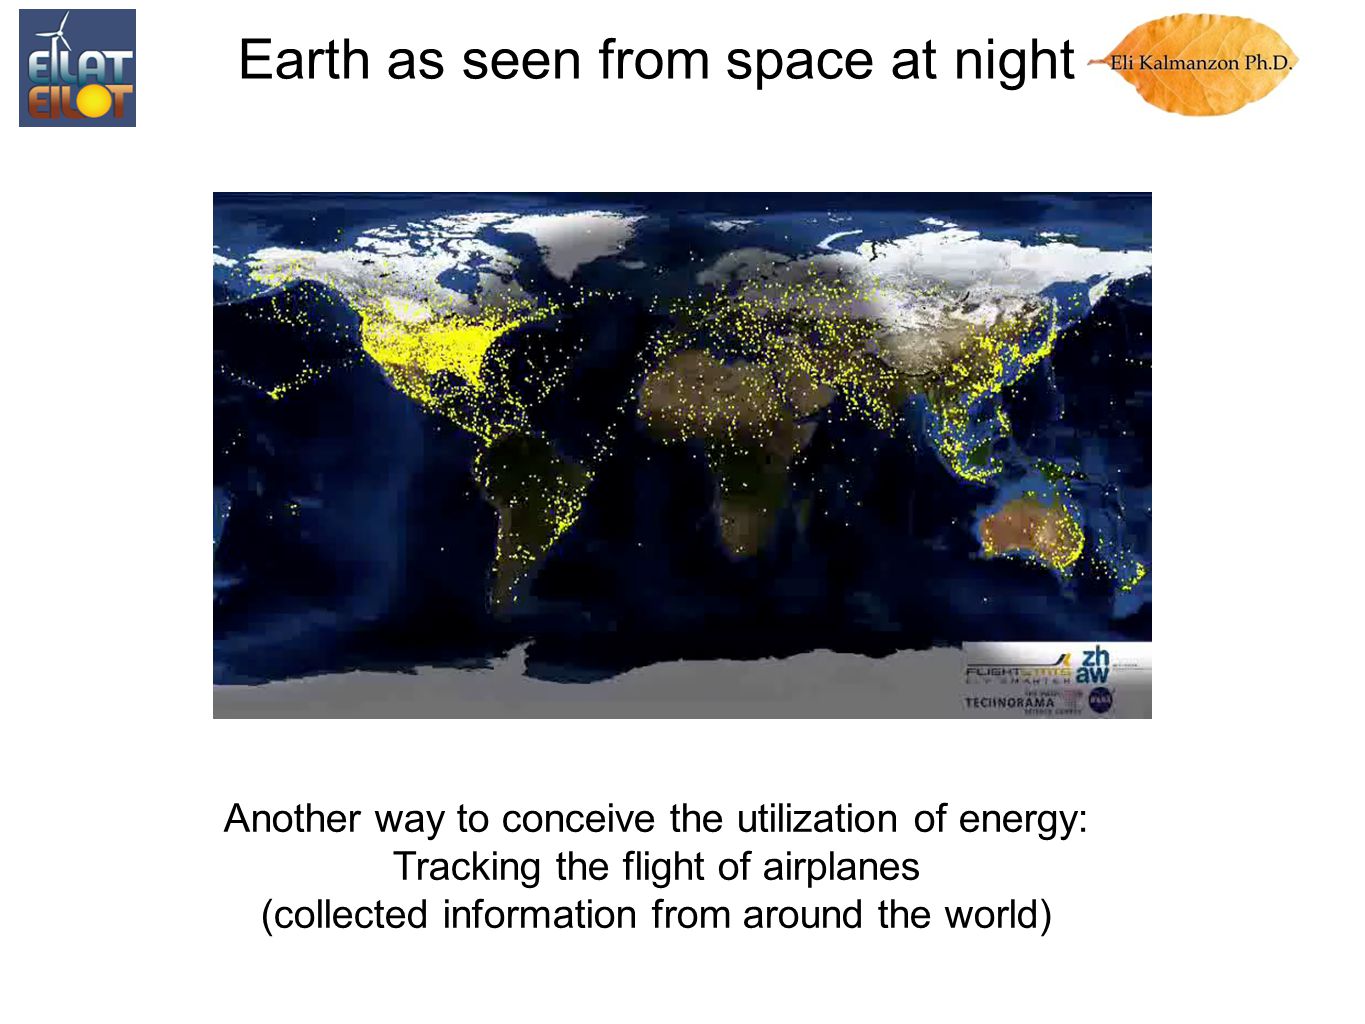 Another way to conceive the utilization of energy: Tracking the flight of airplanes (collected information from around the world) Earth as seen from space at night